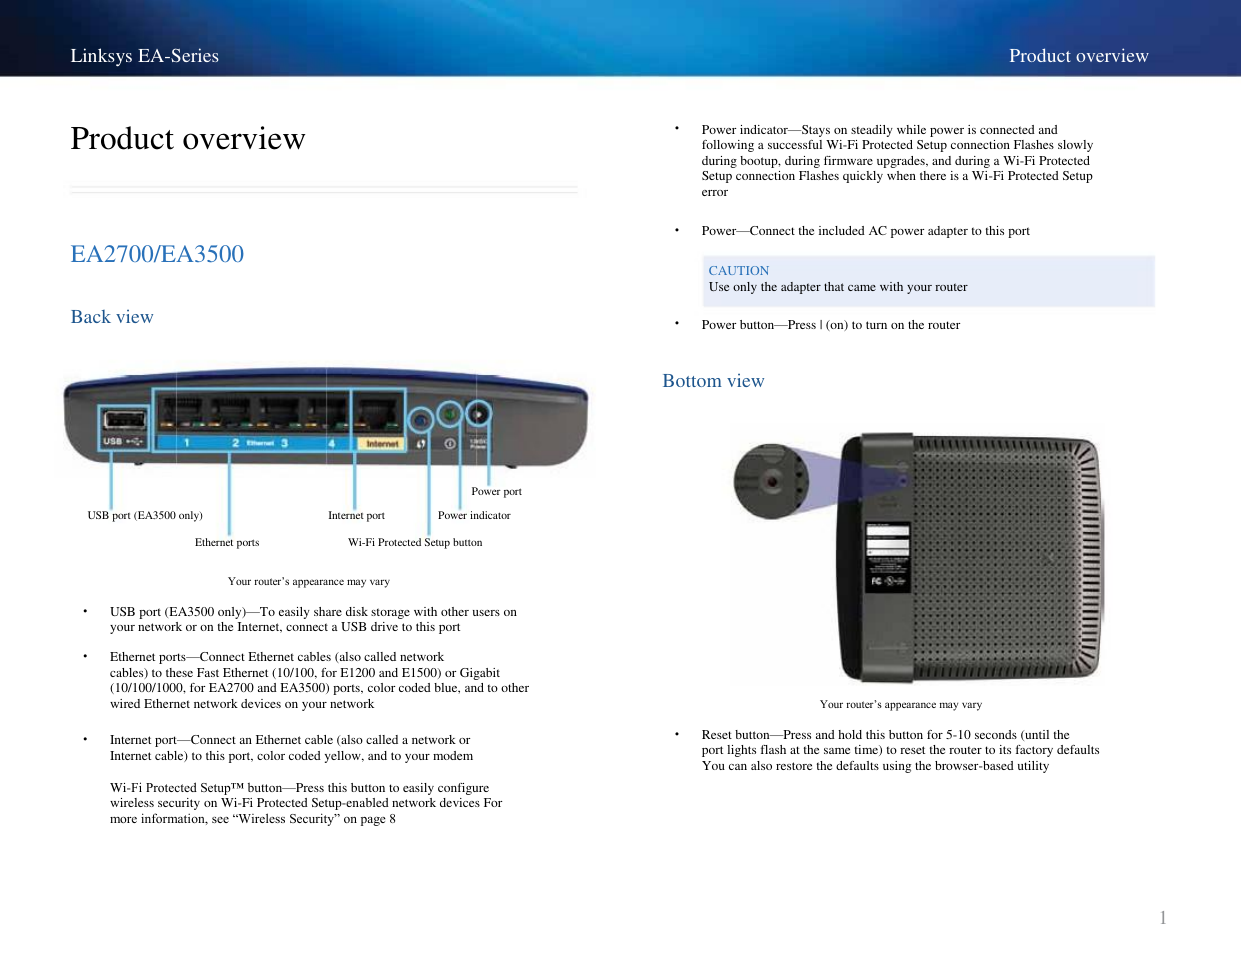 Linksys EA-Series Product overview • Product overview EA2700/EA3500 Back view Power indicator—Stays on steadily while power is connected and following a successful Wi-Fi Protected Setup connection Flashes slowly during bootup, during firmware upgrades, and during a Wi-Fi Protected Setup connection Flashes quickly when there is a Wi-Fi Protected Setup error Power—Connect the included AC power adapter to this port CAUTION Use only the adapter that came with your router • • Power button—Press | (on) to turn on the router Bottom view Power port USB port (EA3500 only) Ethernet ports Internet port Power indicator Wi-Fi Protected Setup button Your router’s appearance may vary • • USB port (EA3500 only)—To easily share disk storage with other users on your network or on the Internet, connect a USB drive to this port Ethernet ports—Connect Ethernet cables (also called network cables) to these Fast Ethernet (10/100, for E1200 and E1500) or Gigabit (10/100/1000, for EA2700 and EA3500) ports, color coded blue, and to other wired Ethernet network devices on your network Internet port—Connect an Ethernet cable (also called a network or Internet cable) to this port, color coded yellow, and to your modem Wi-Fi Protected Setup™ button—Press this button to easily configure wireless security on Wi-Fi Protected Setup-enabled network devices For more information, see ―Wireless Security‖ on page 8 • Your router’s appearance may vary • Reset button—Press and hold this button for 5-10 seconds (until the port lights flash at the same time) to reset the router to its factory defaults You can also restore the defaults using the browser-based utility 1 